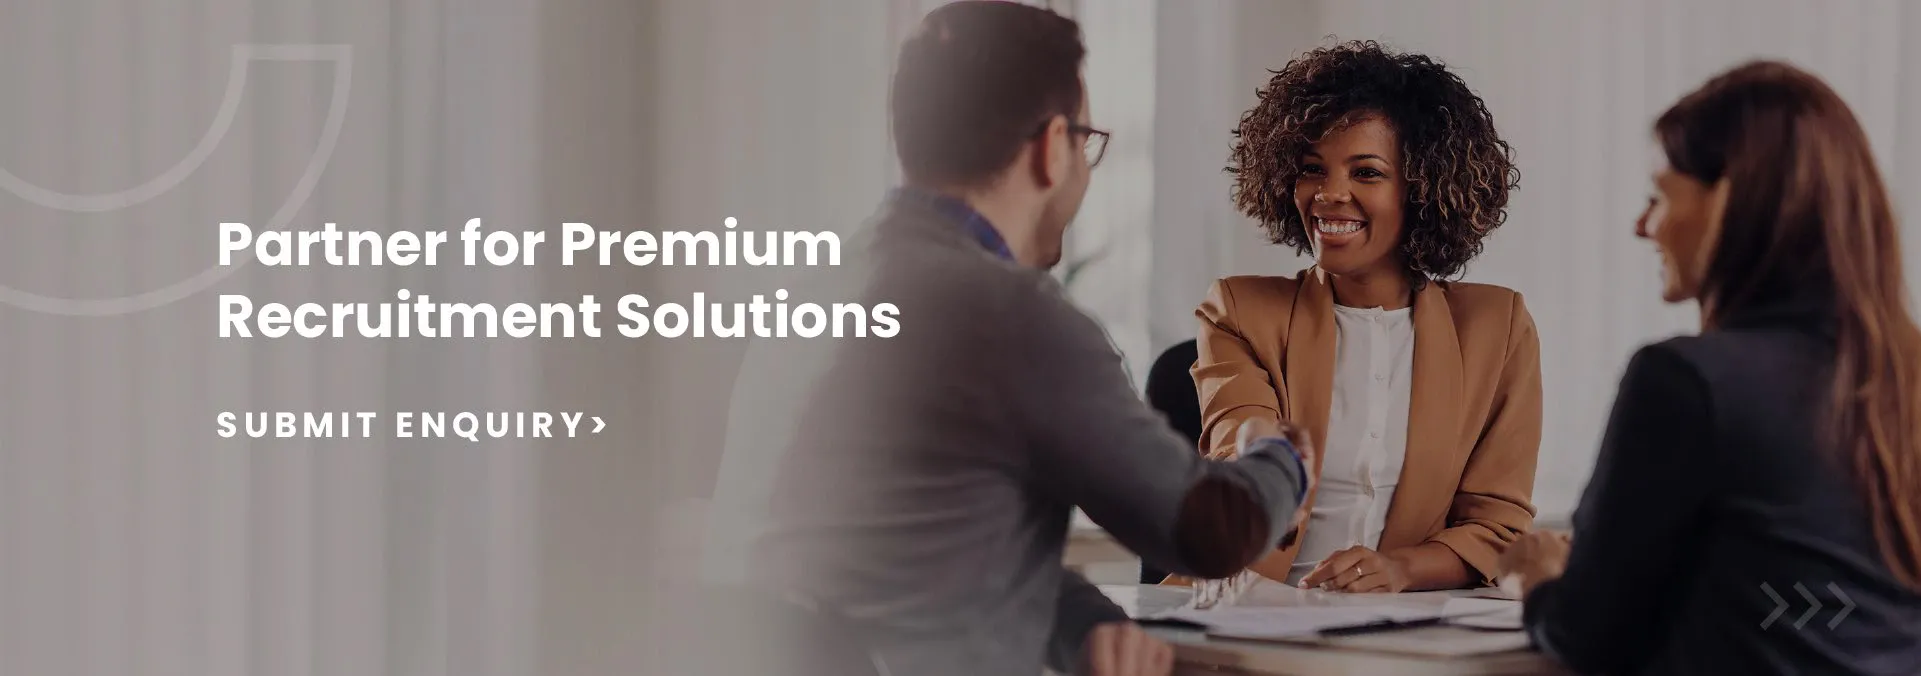 Partner for Premium Recruitment Solutions by NADIA Global